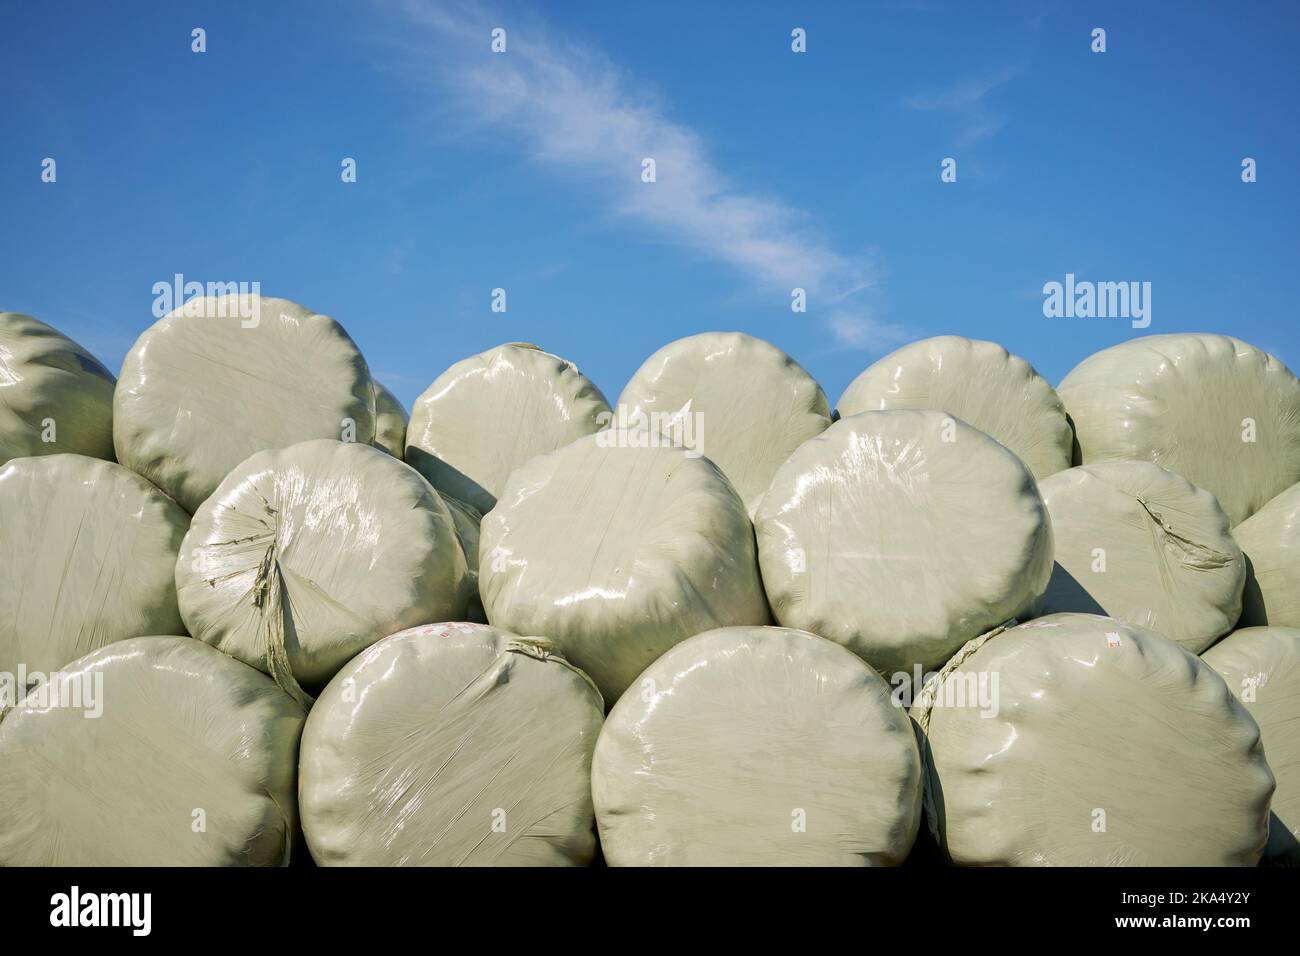 Silage bags against blue sky Stock Photo